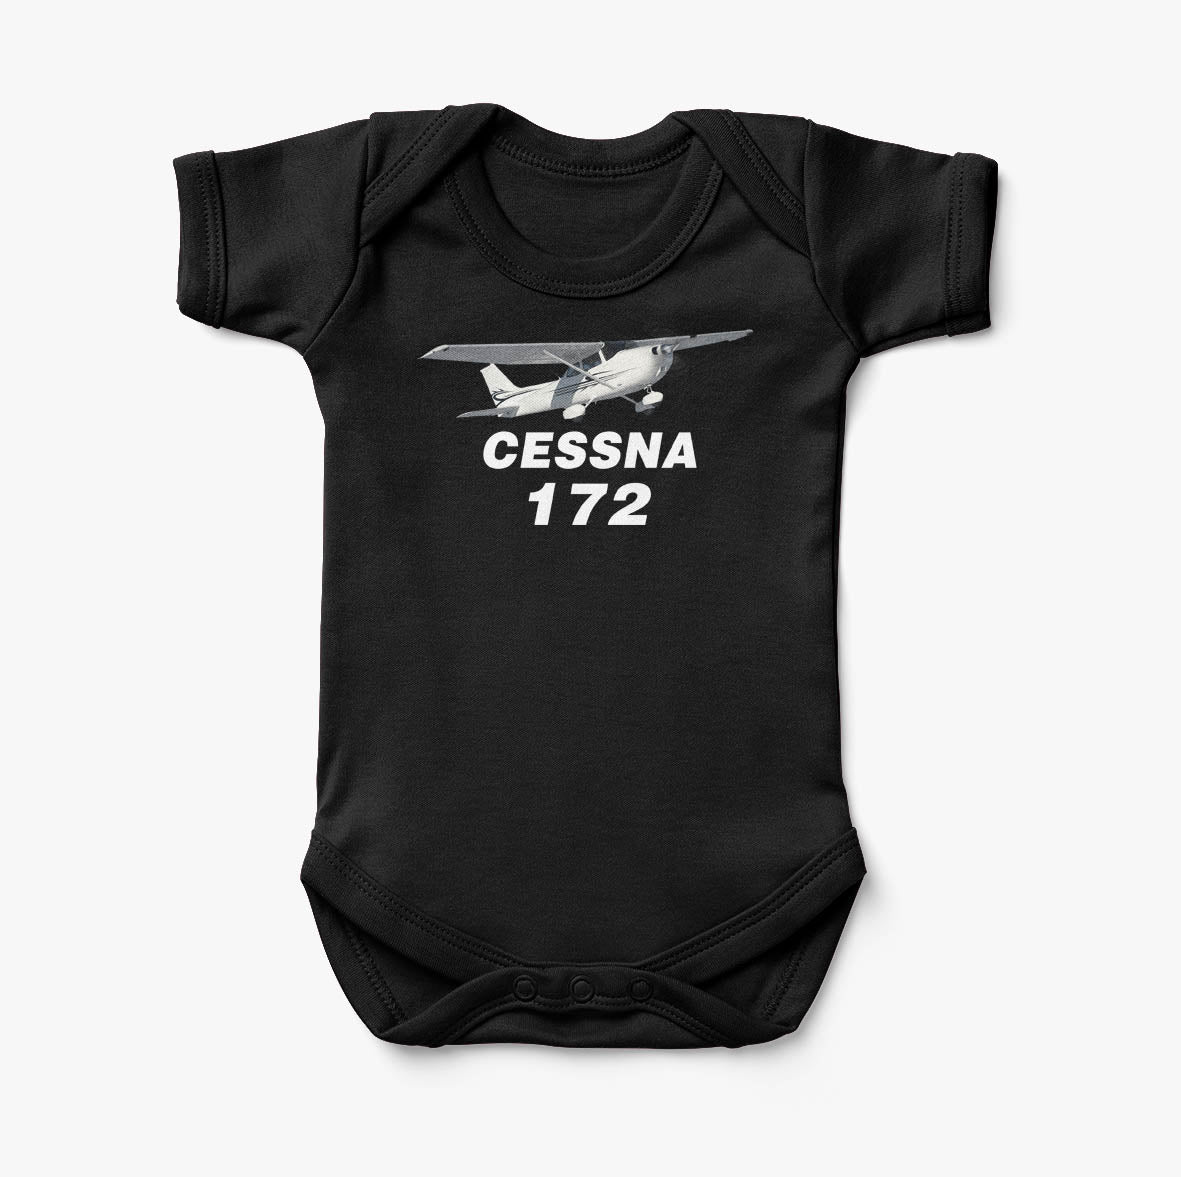 The Cessna 172 Designed Baby Bodysuits